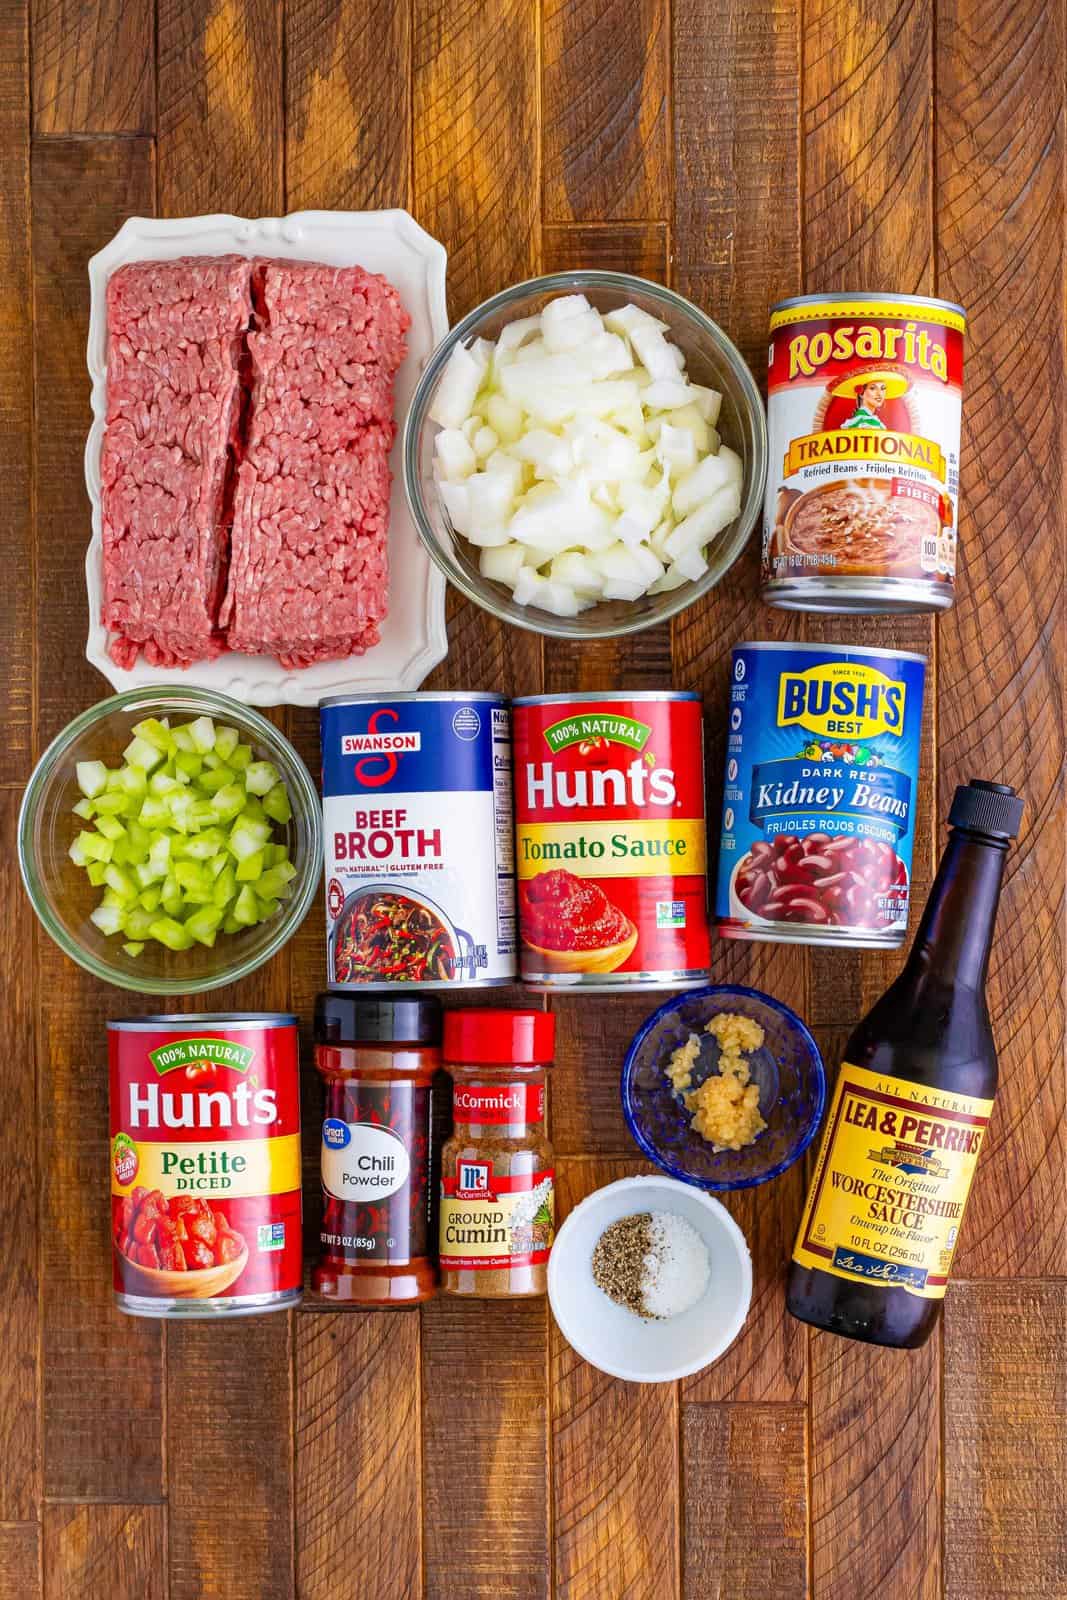 ingredients needed for chili: ground beef, celery, onion, chili powder, cumin, garlic, petite diced tomatoes, tomato sauce, dark red kidney beans, beef broth, refried beans, Worcestershire sauce, salt and pepper.